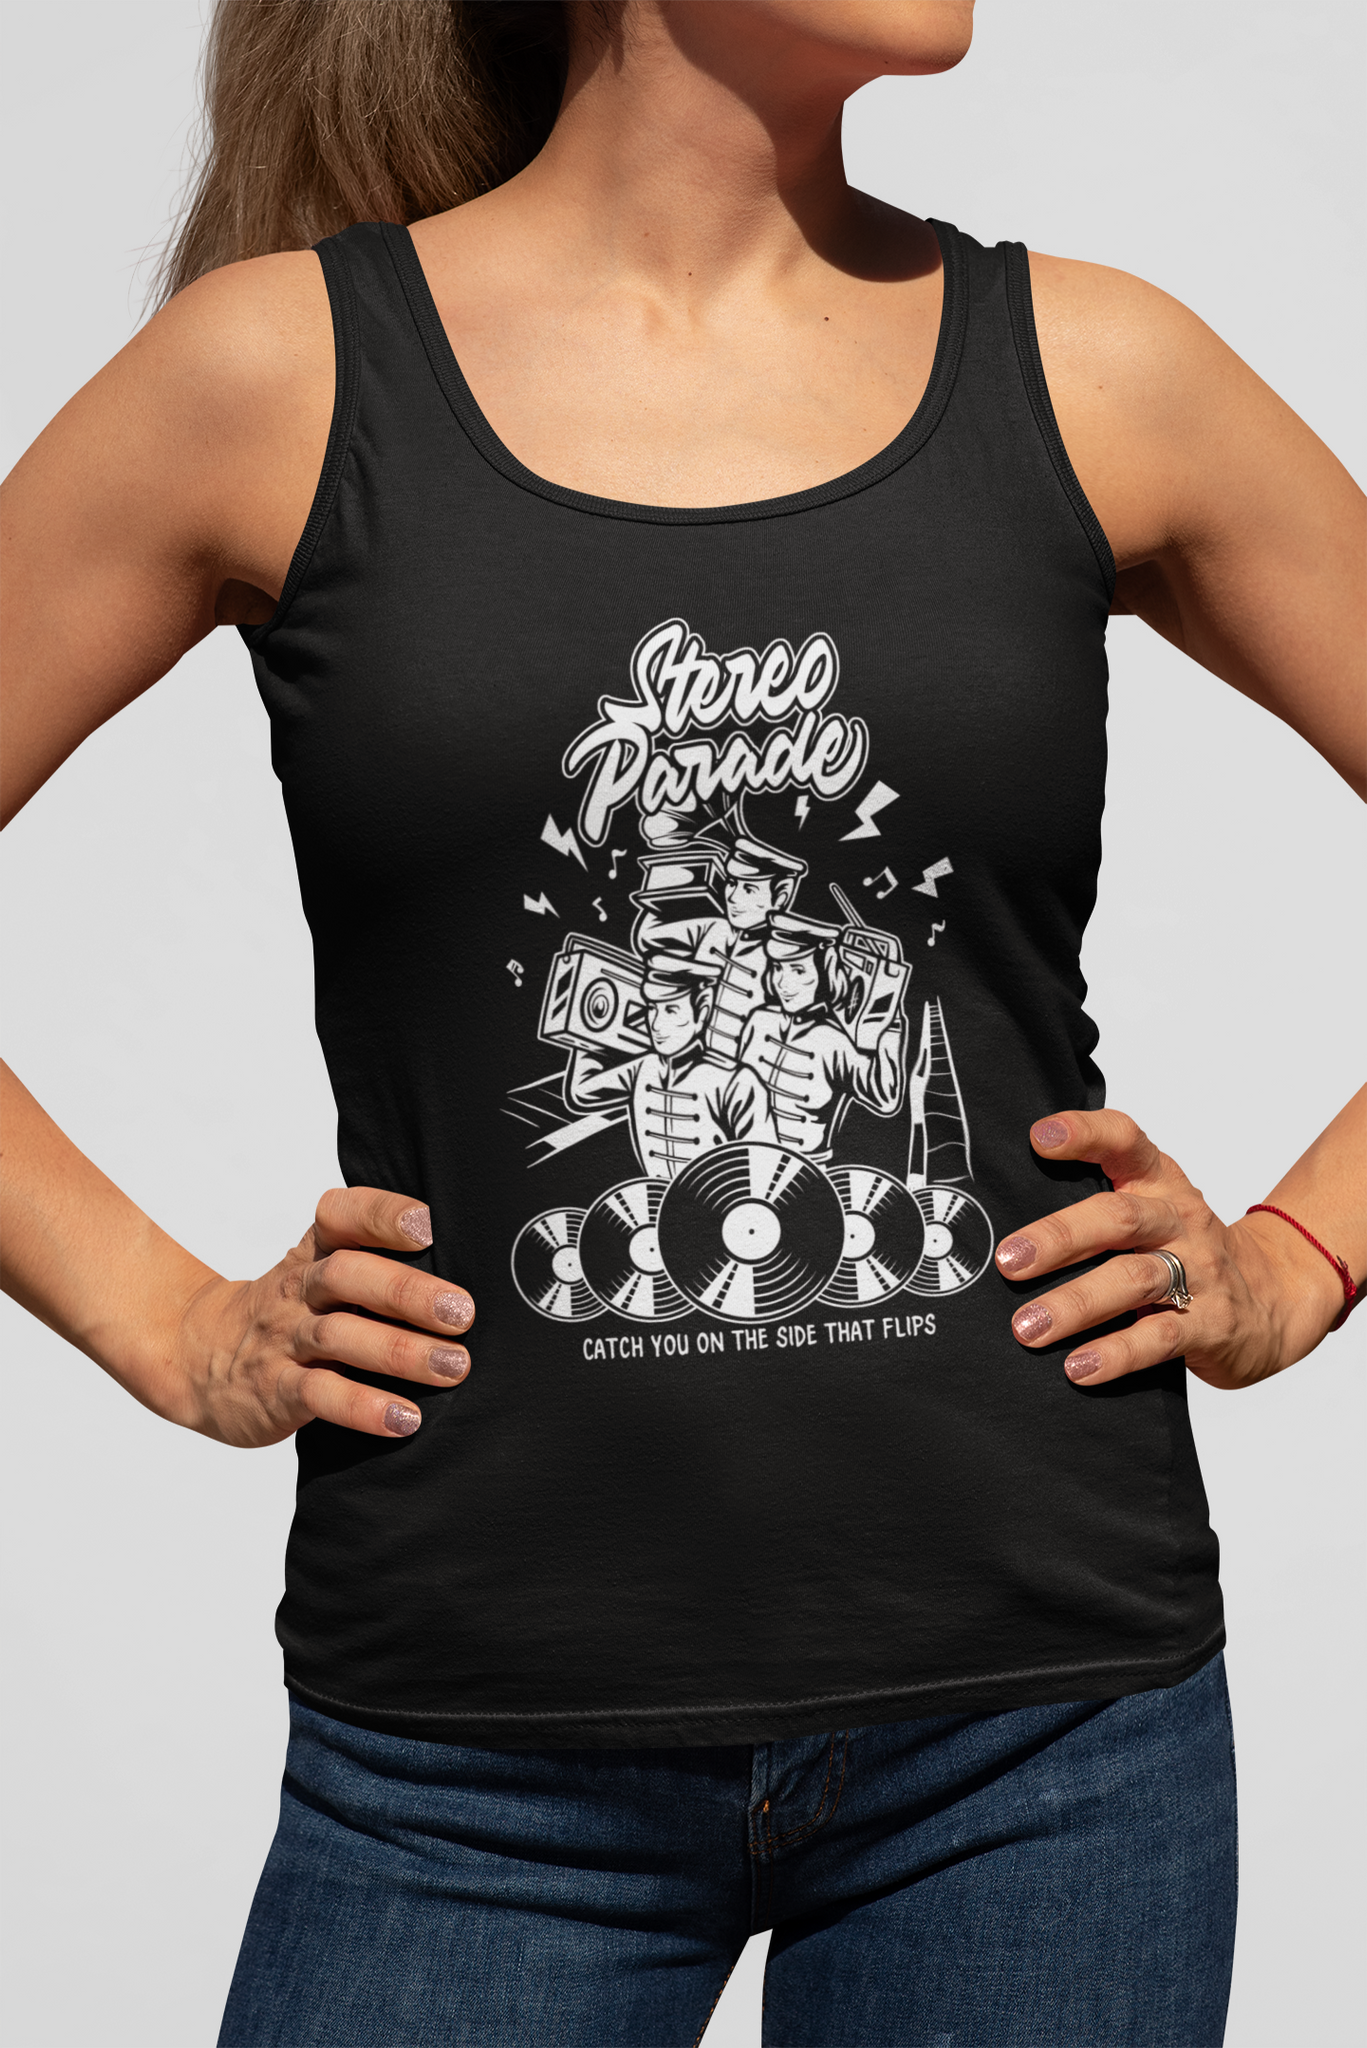 stereoparade "Catch You on the Side that Flips" Women's Tank